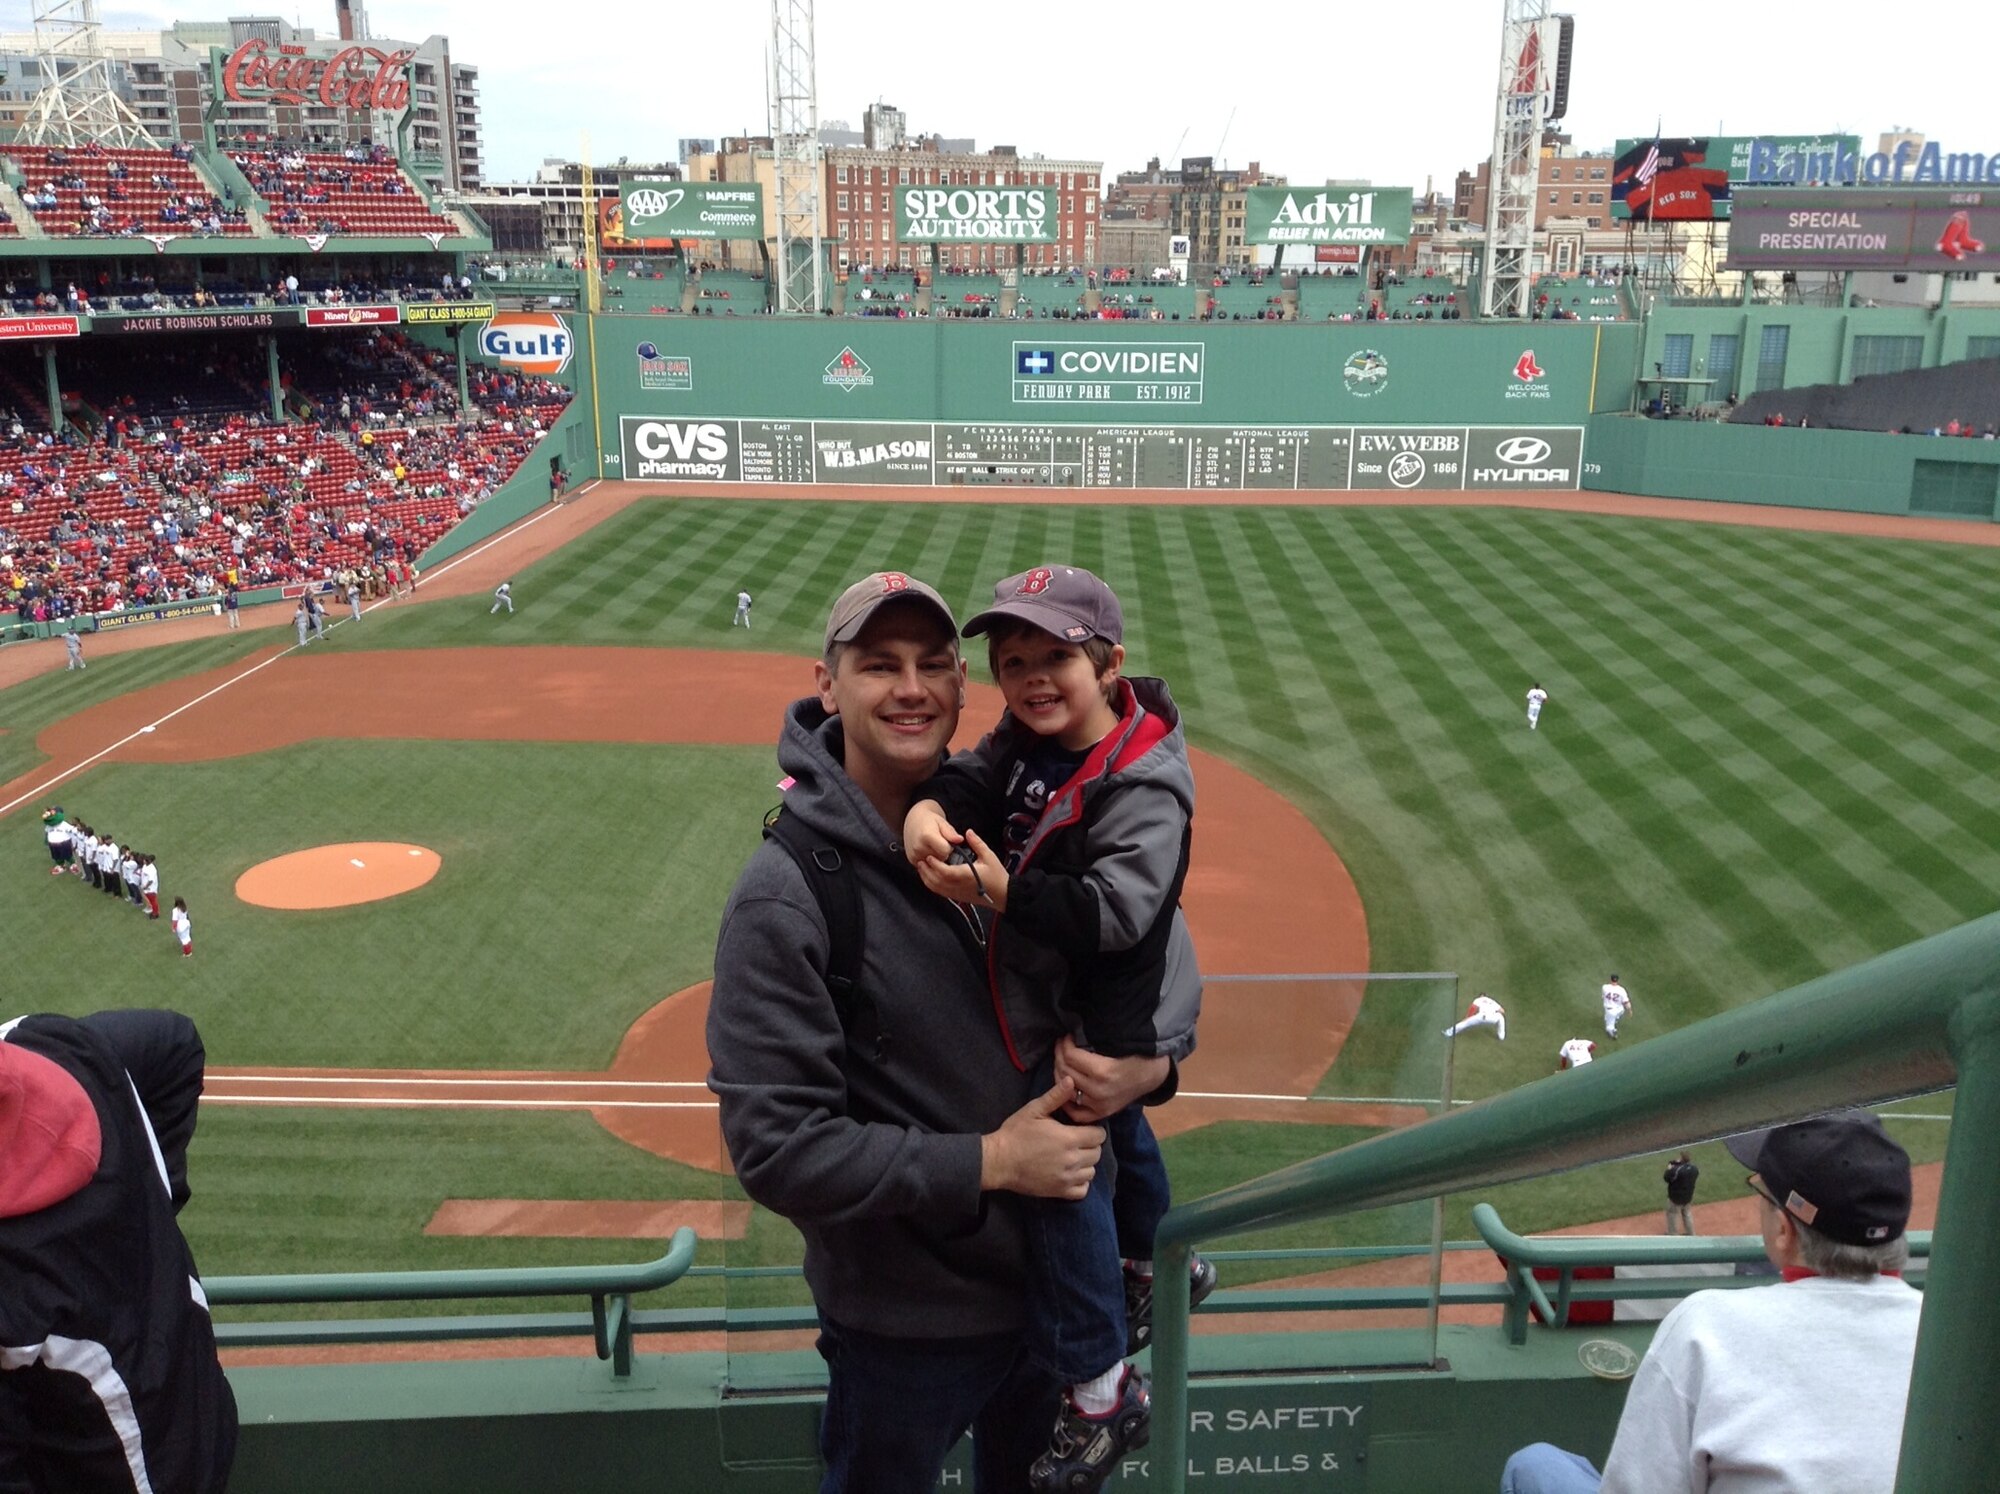 Capt. Garrett Miller and his son, Jacoby, had their photo taken April 15, 2013, during a Red Sox game at Fenway Park on Patriot's Day shortly before Miller’s deployment. Capt. Miller is a physician assistant currently working in flight medicine for the 4th Expeditionary Reconnaissance Squadron, deployed from Hanscom Air Force Base. Mass. Capt. 